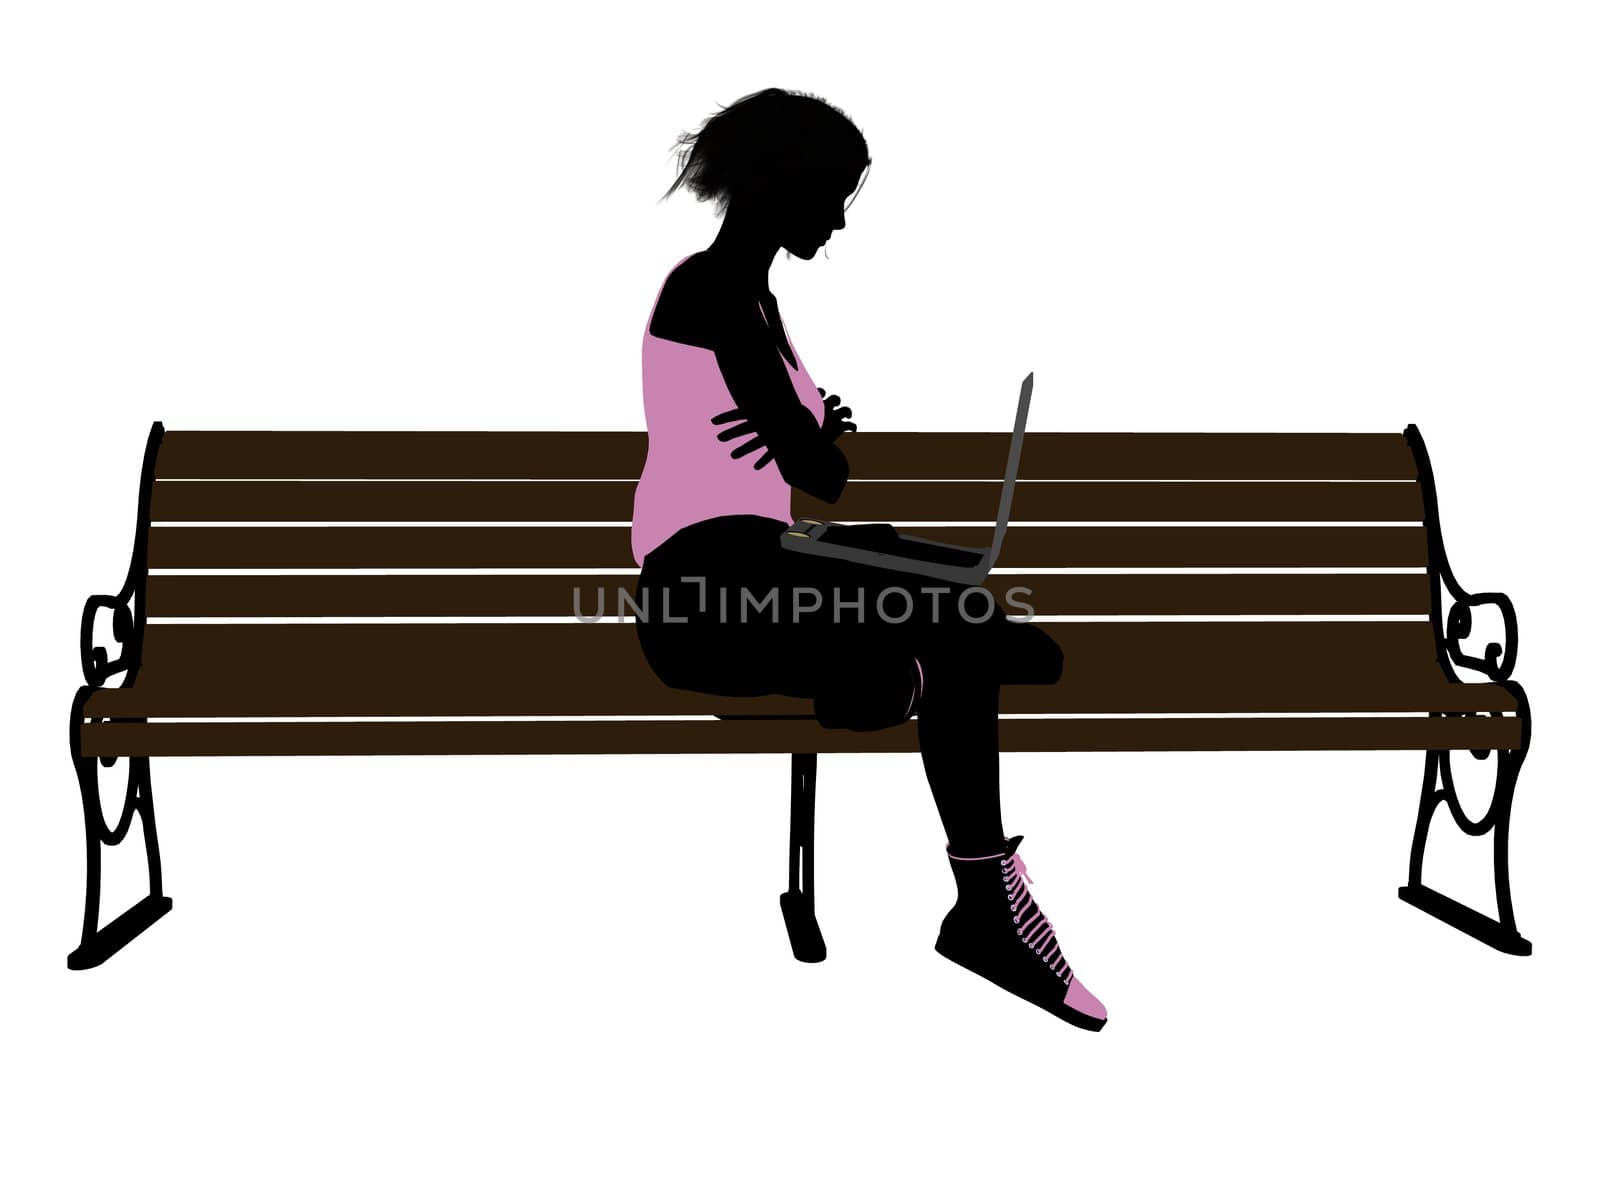 Female Athlete With A Laptop Sitting On A Bench Illustration Sil by kathygold